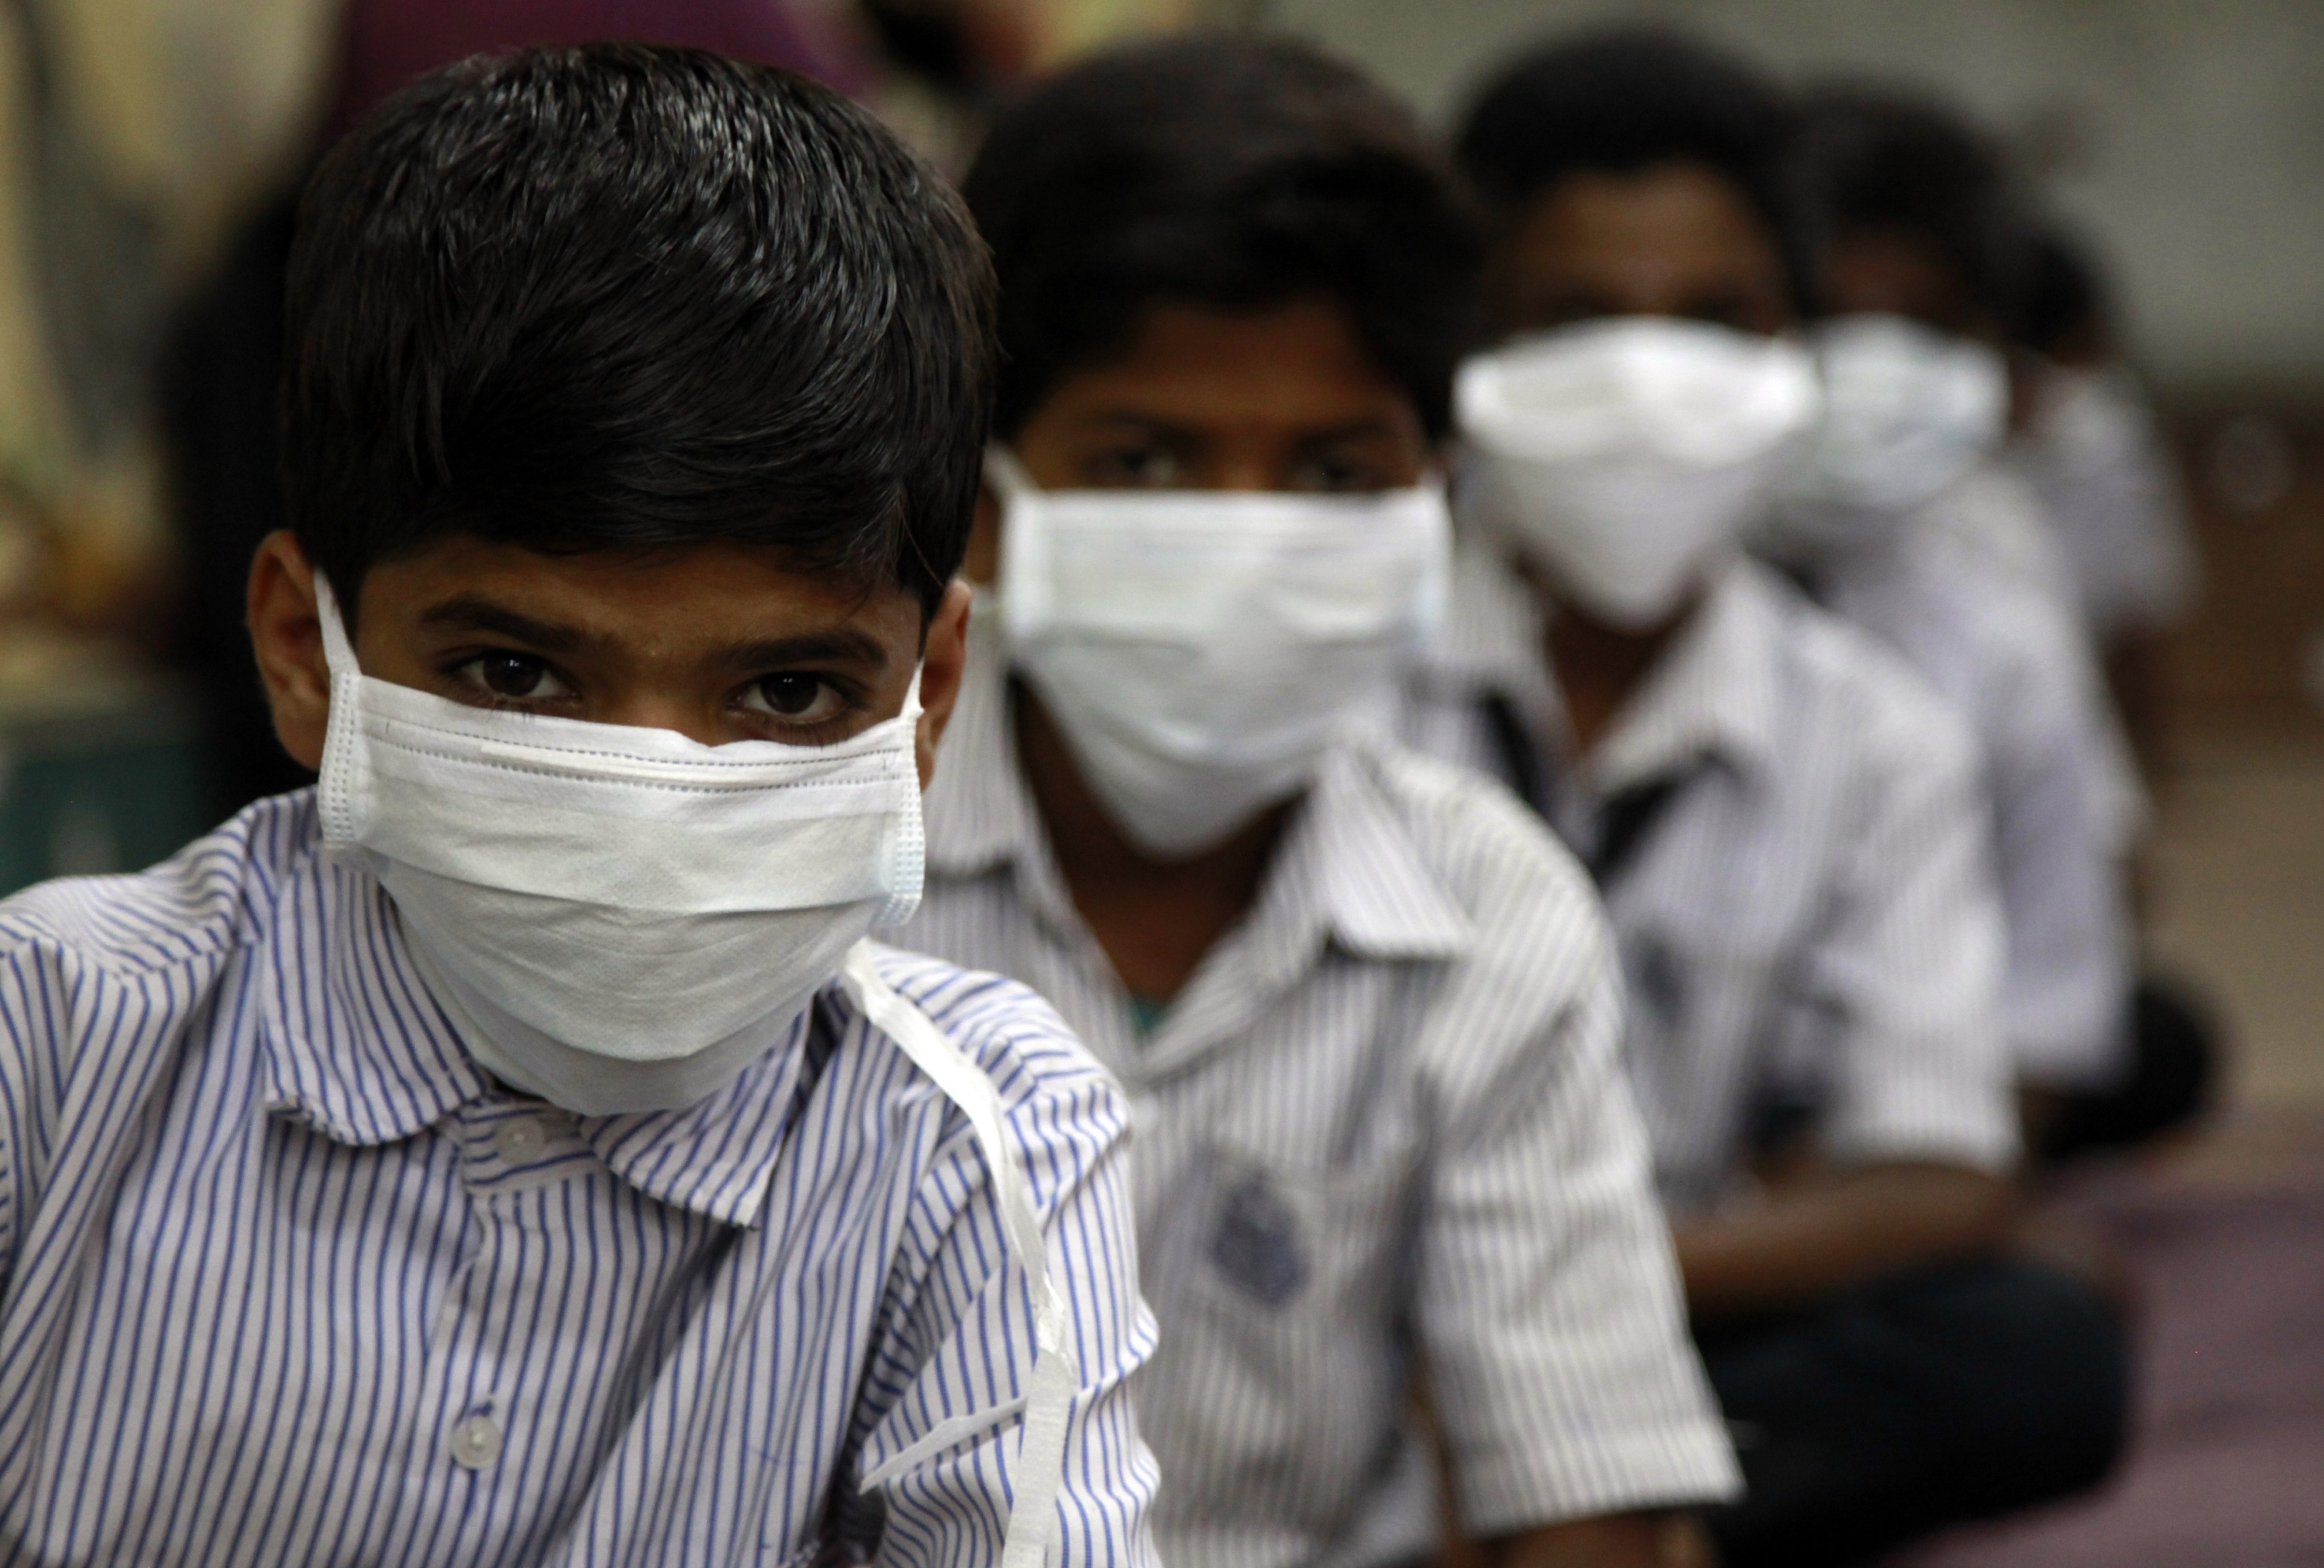 A class of Indian students have taken to wearing masks to avoid contracting swine flu in Mumbai, India on 20 February, 2015. (Anadolu Agency—Getty Images)